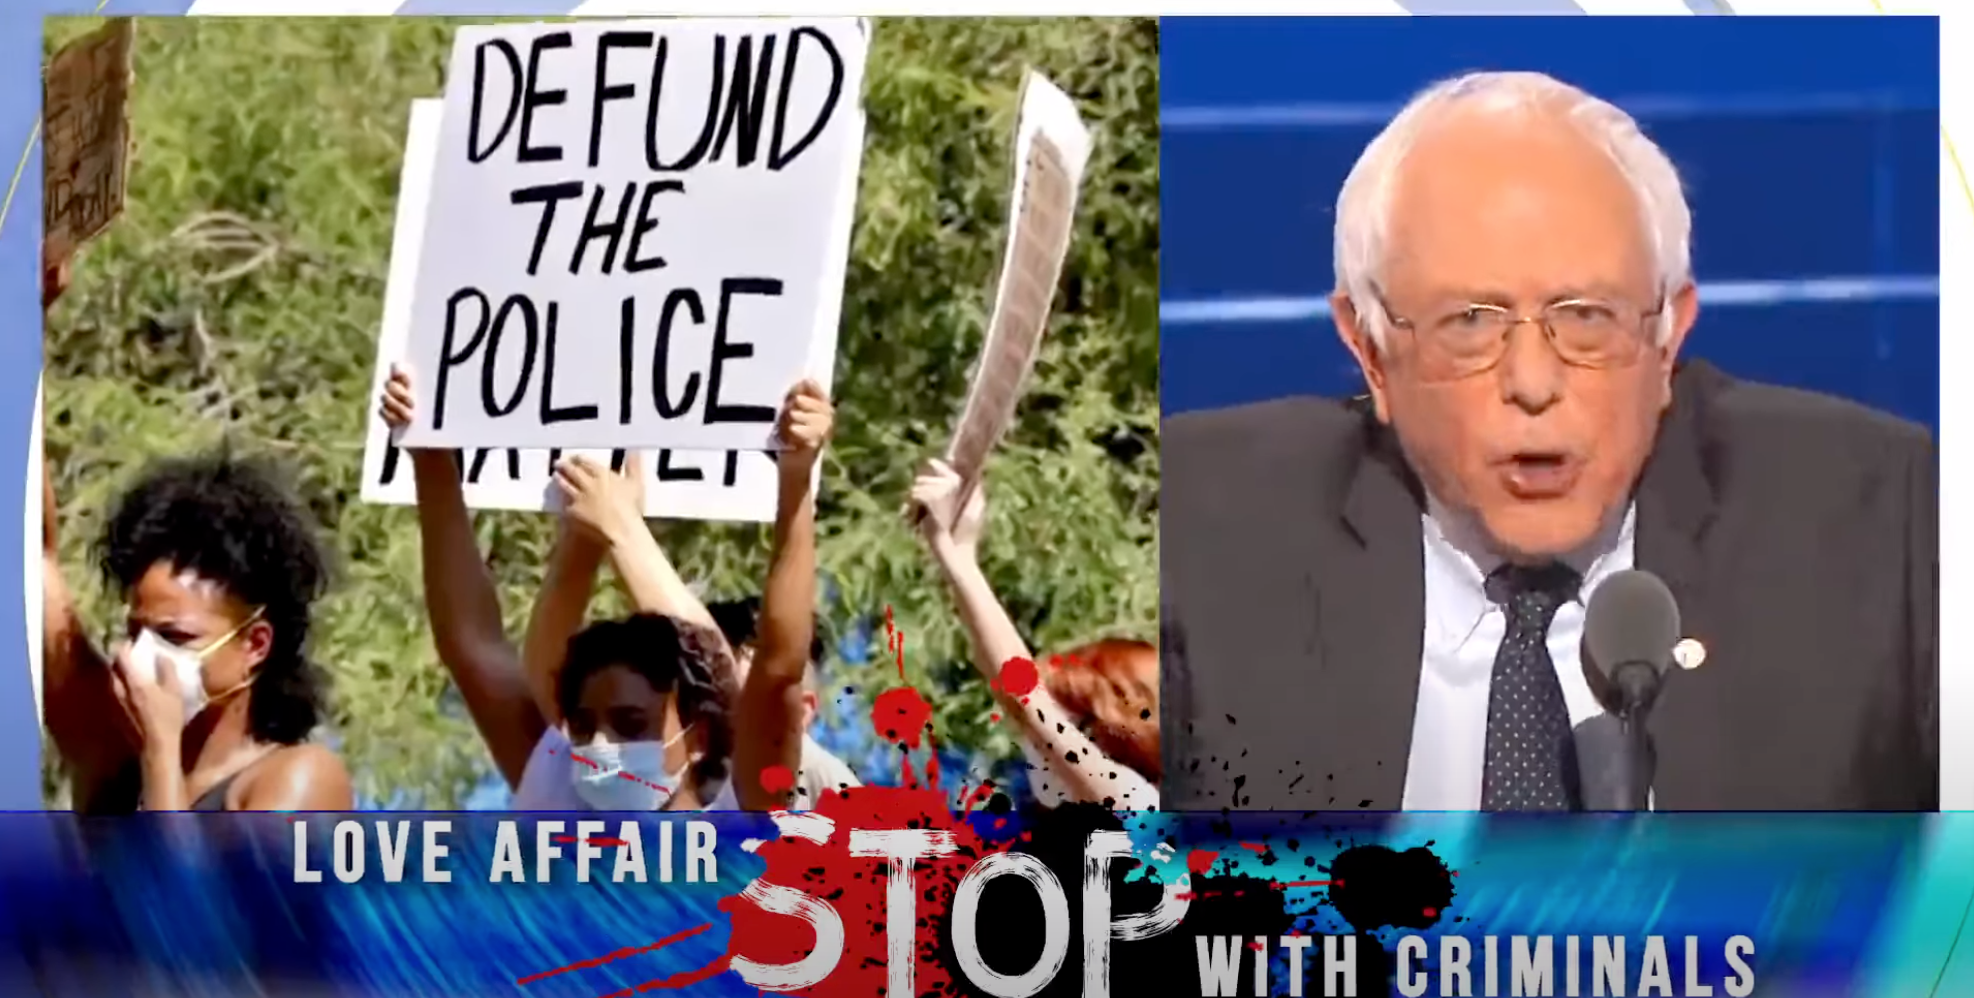 A still image from the Citizens For Sanity ads that ran during the MLB Playoffs, this one juxtaposing Bernie Sanders and words accusing him of having a love affair with violent criminals.